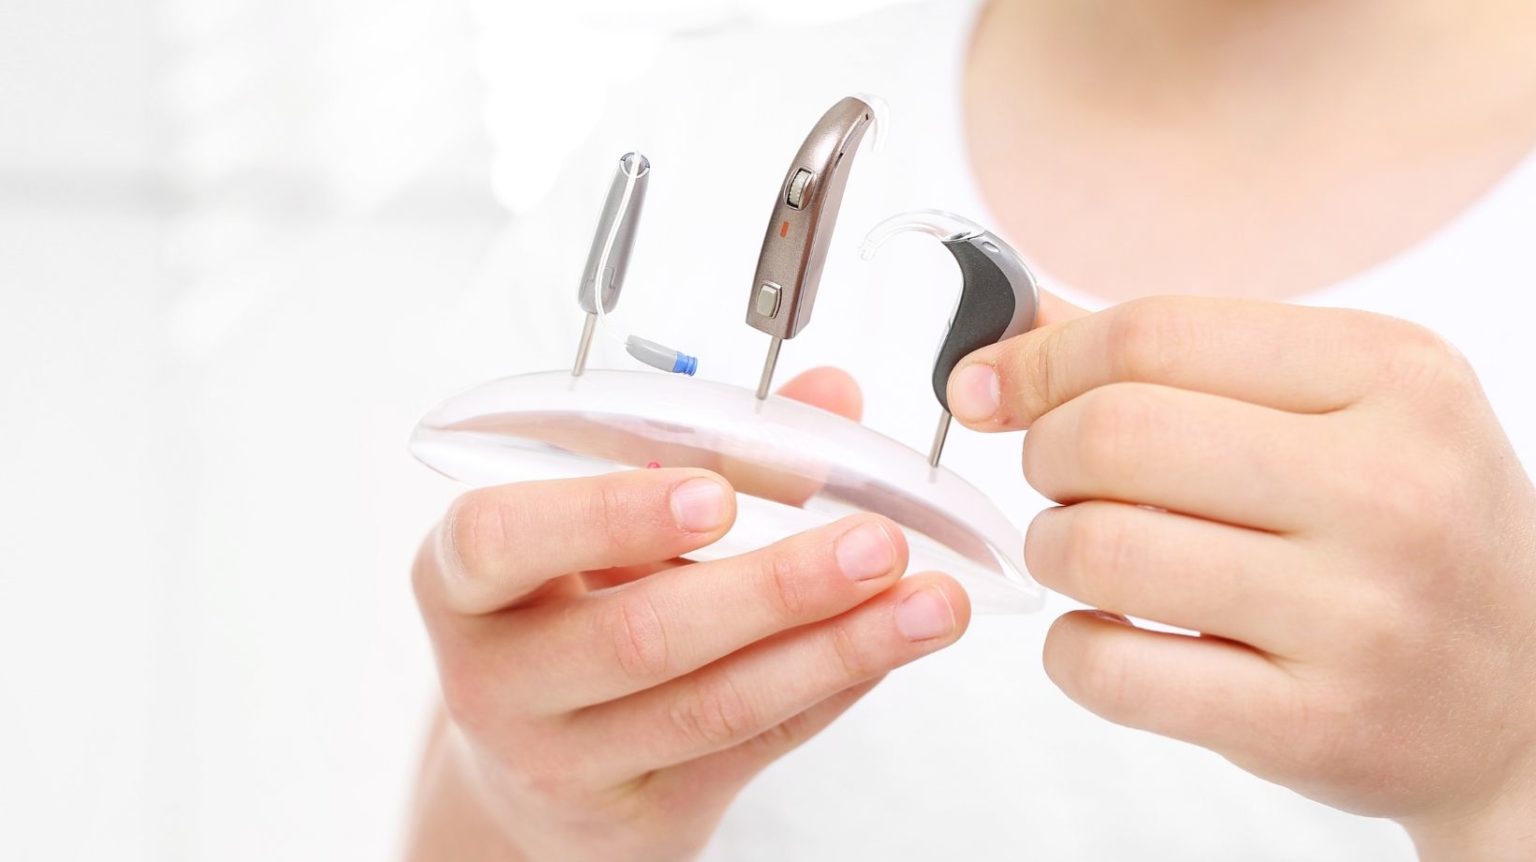 Does Medicare pay for hearing aids?